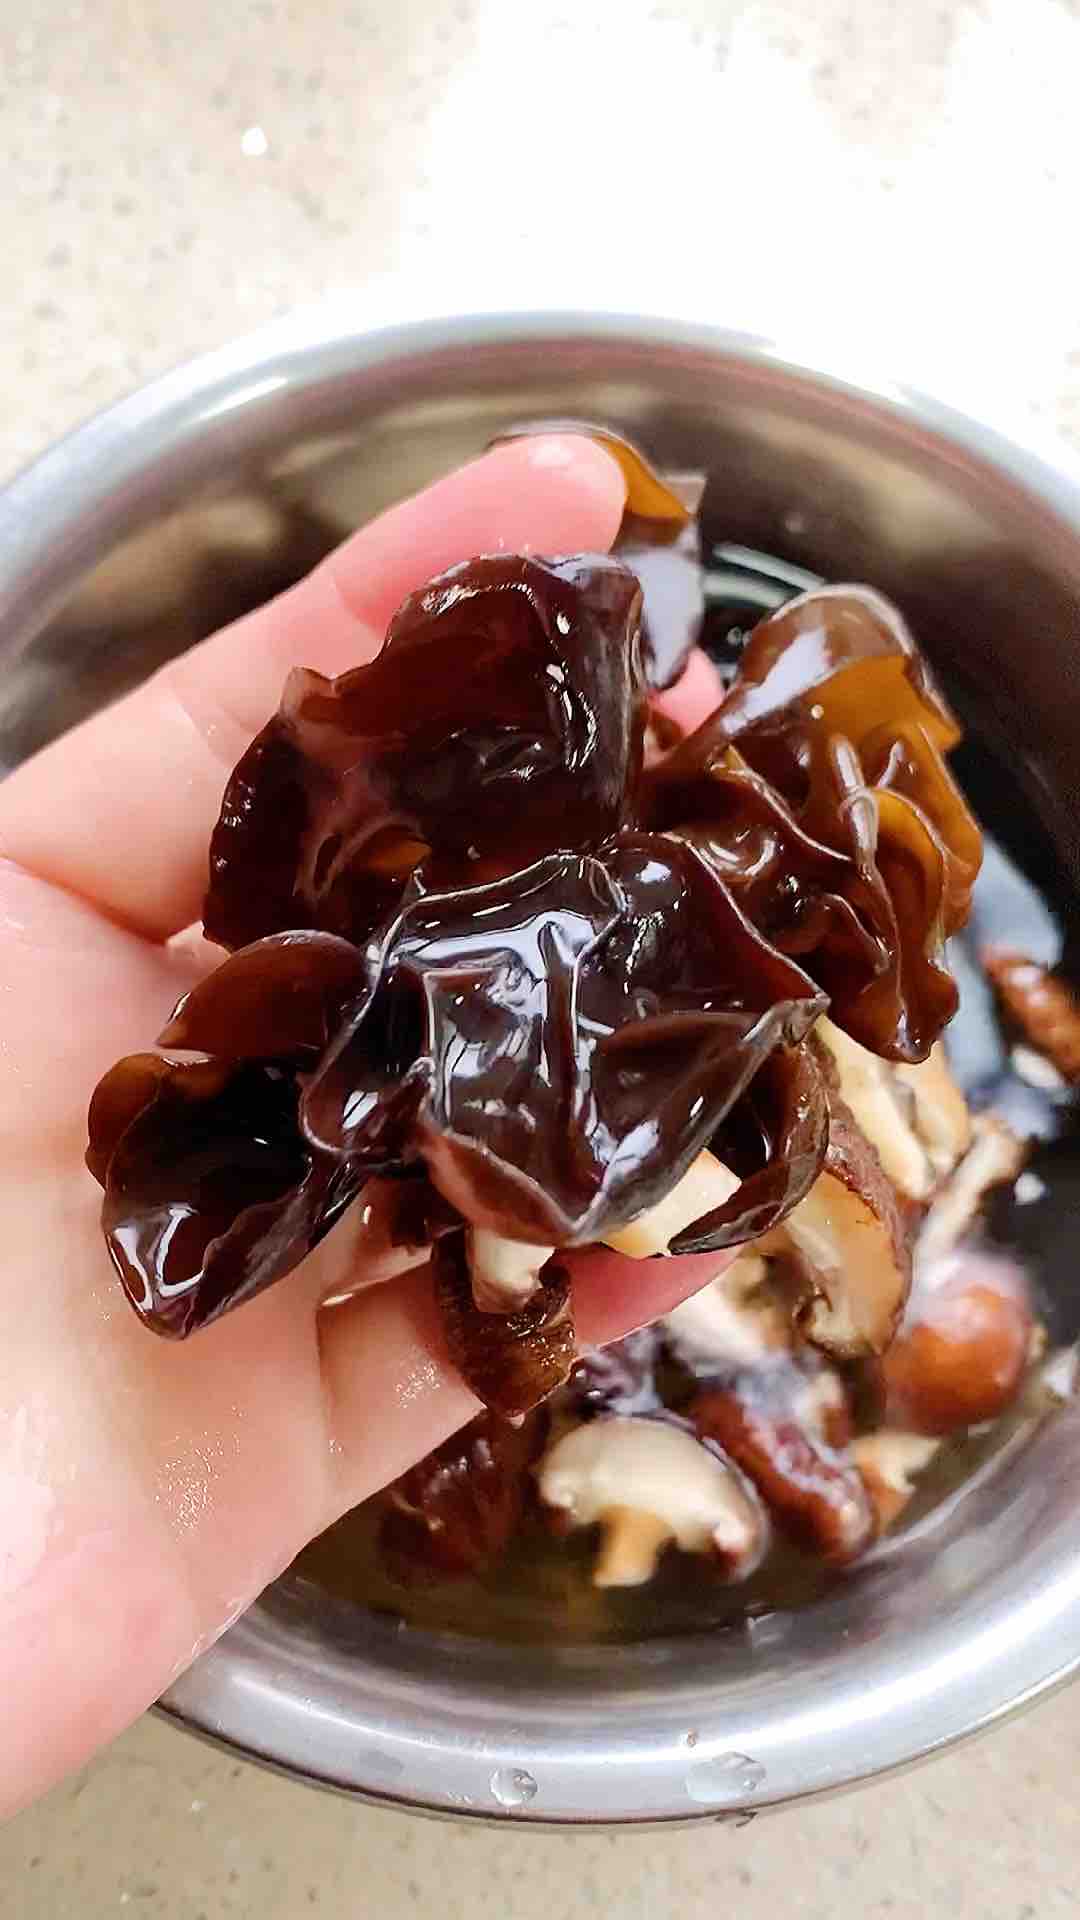 Fried Fungus with Spiced Dried Beans recipe